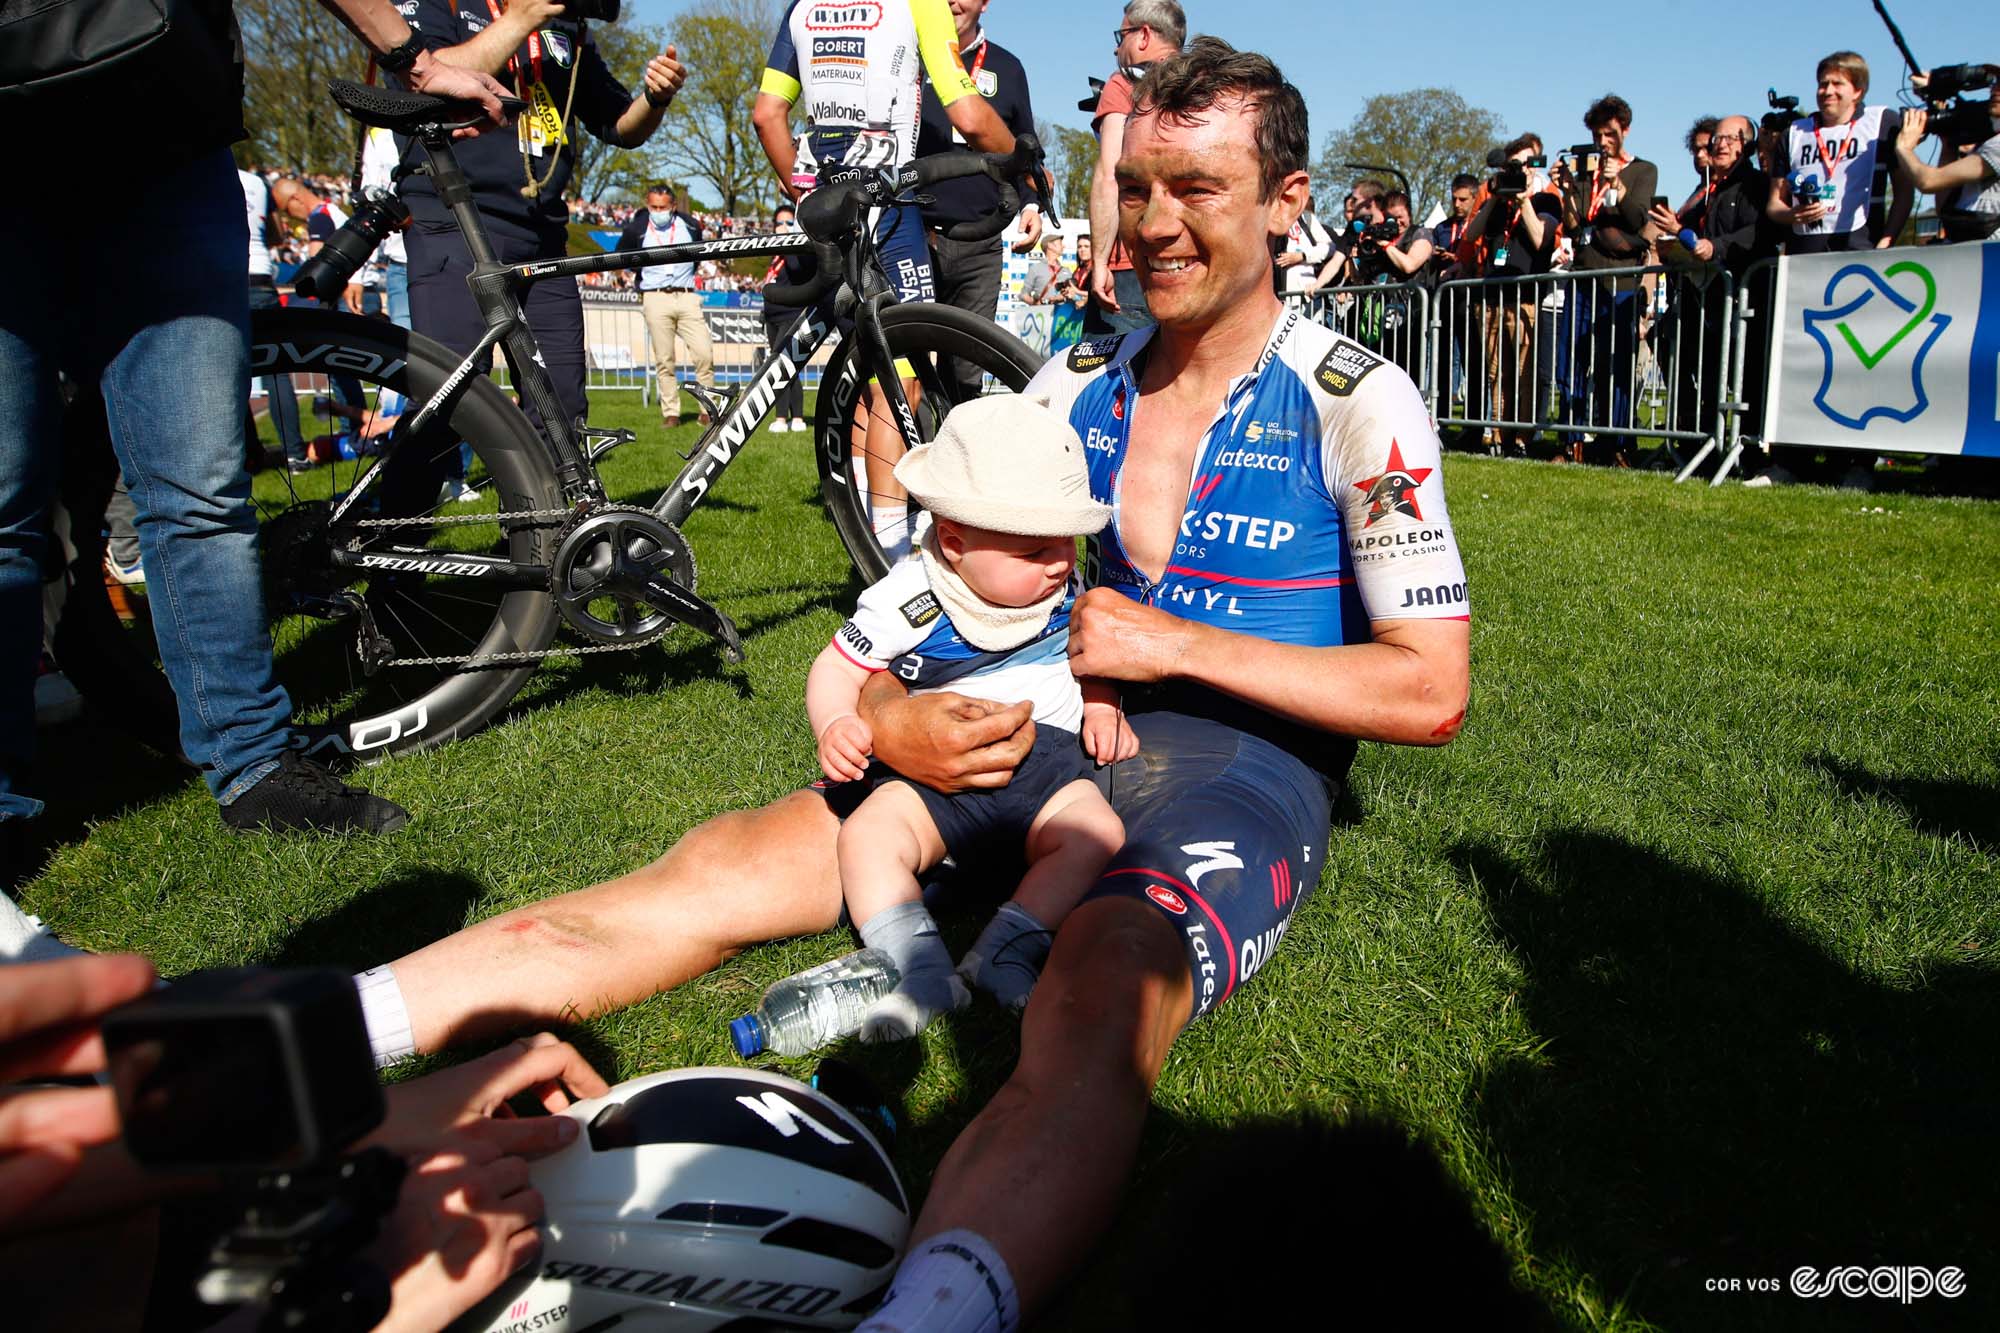 Yves Lampaert sits on the green infield grass at the velodrome following the 2022 Paris-Roubaix. His infant son sits on his lap. wearing a team jersey and bucket hat. Yves is smiling and covered with grit.